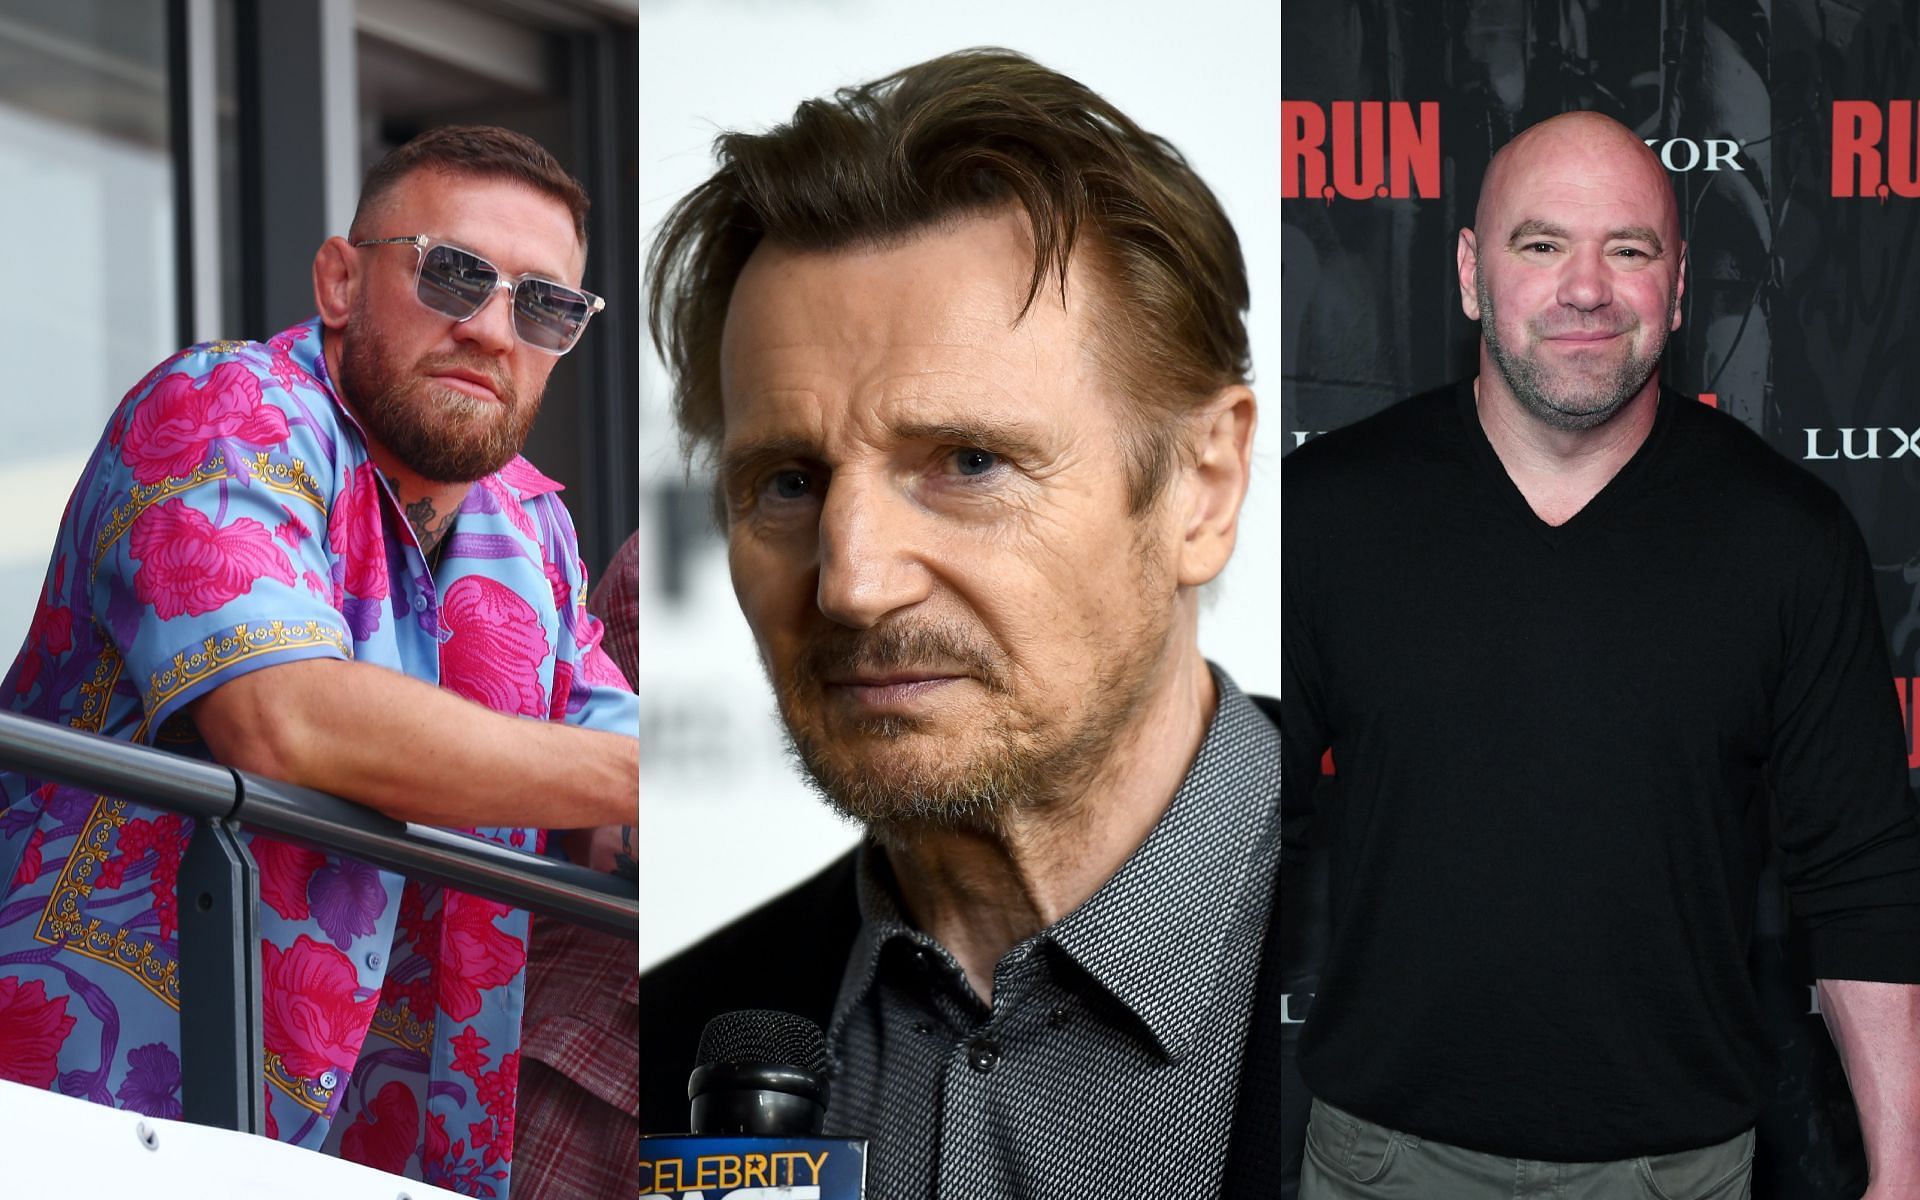 Conor McGregor (left), Liam Neeson (centre) and Dana White (right) [Image Credits: Vanity Fair and Getty Images]